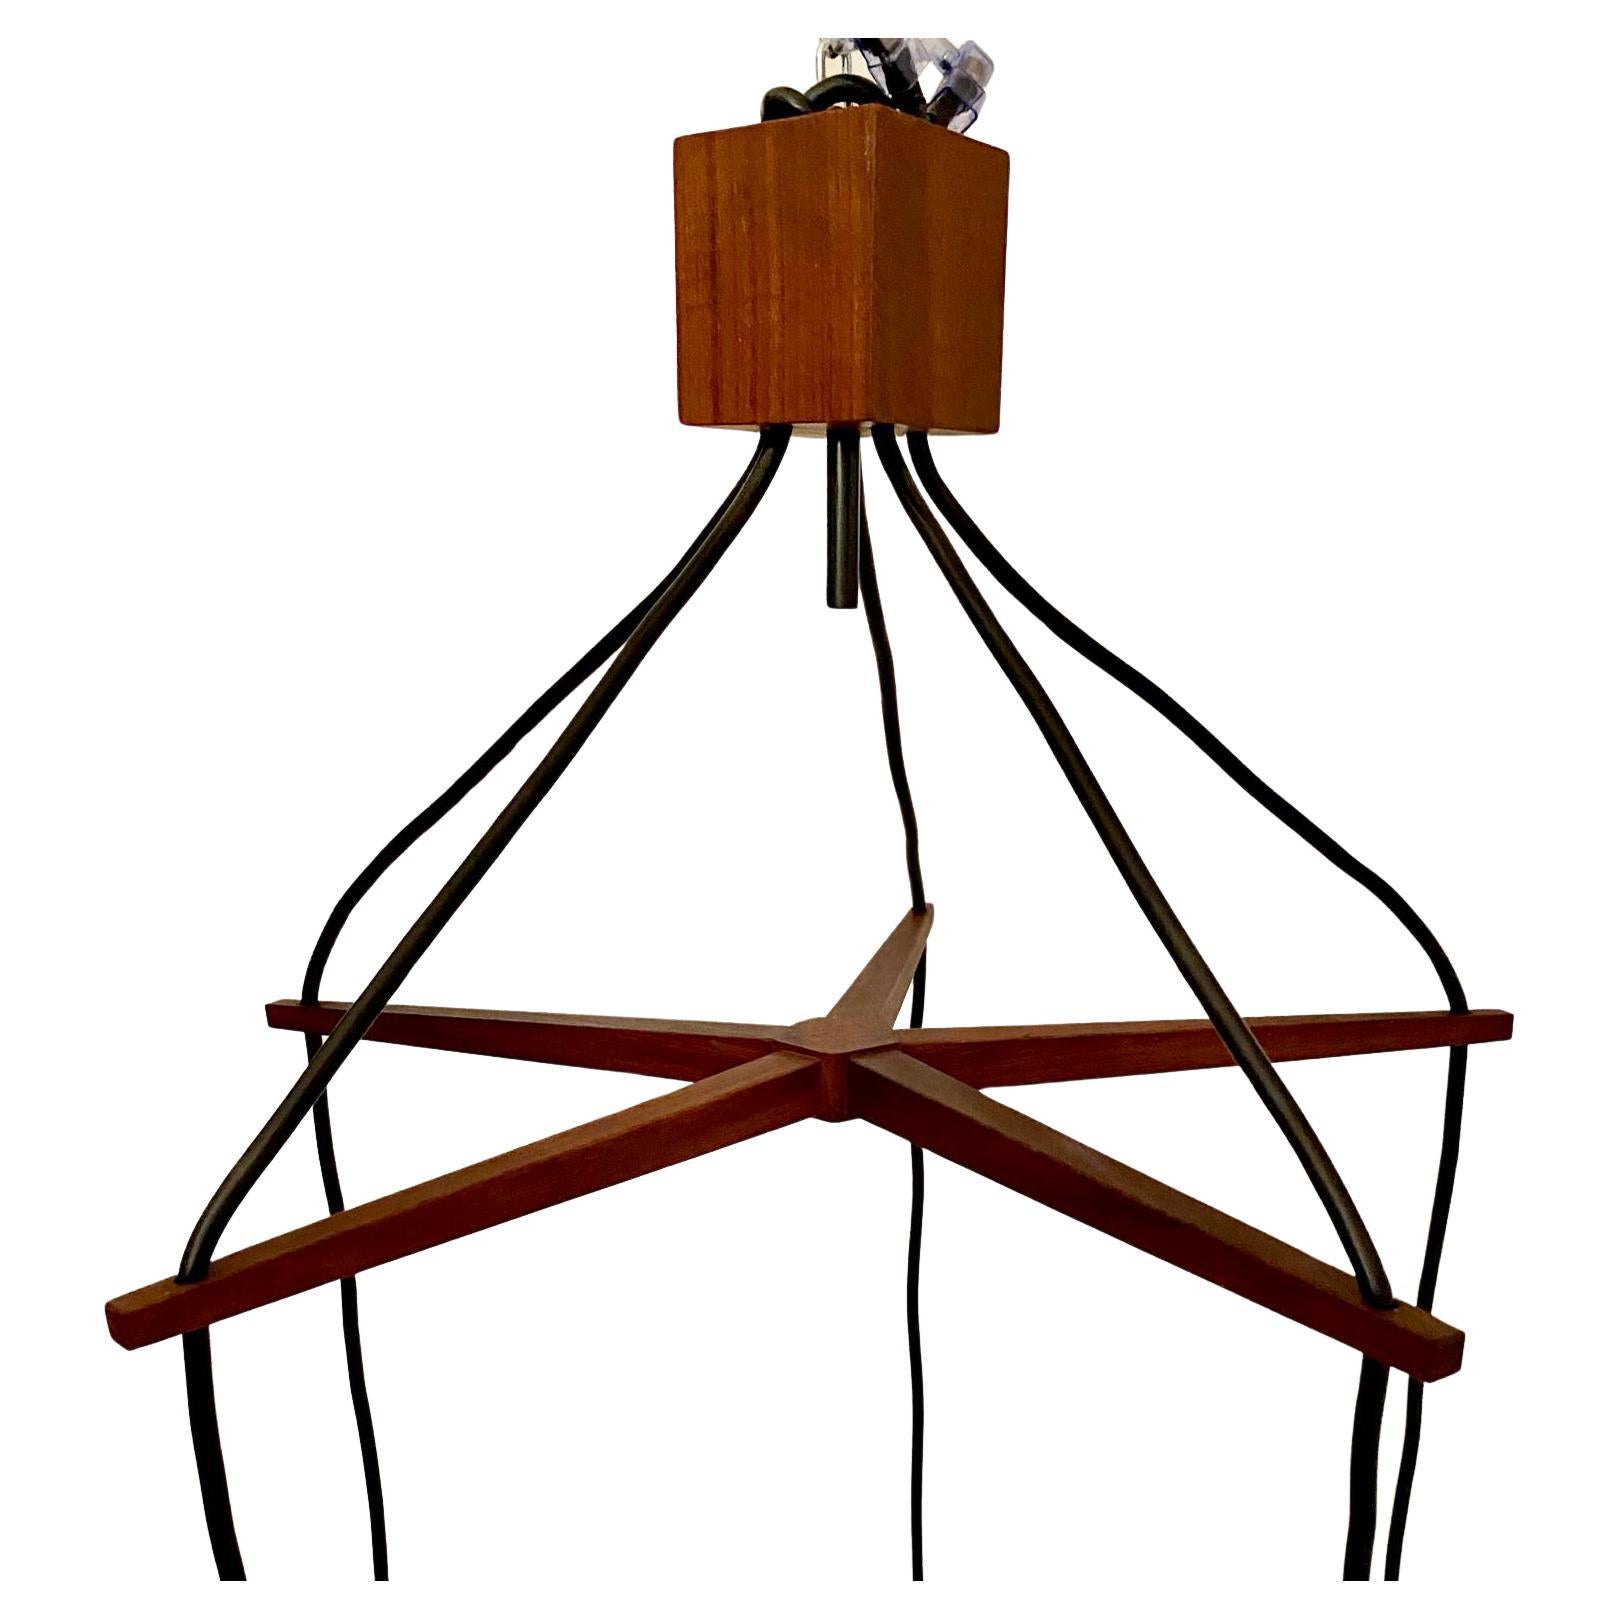 Vintage Wood Hanging Chandelier, Guzzini Italy, 1960 's For Sale 3